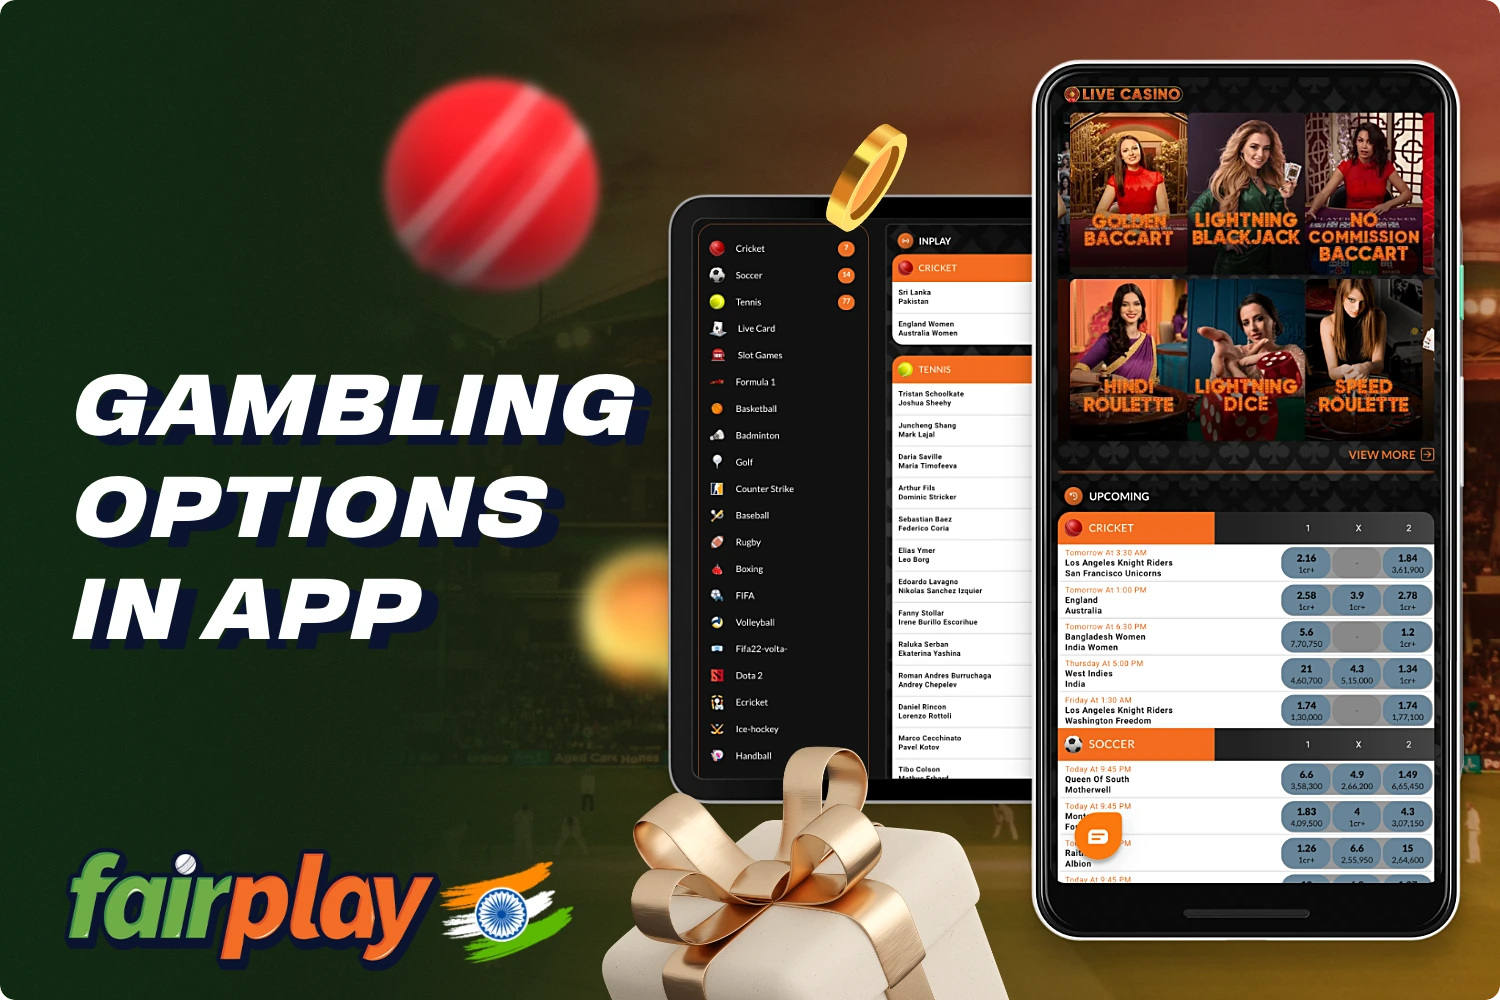 The Fairplay app offers a variety of gambling options and more